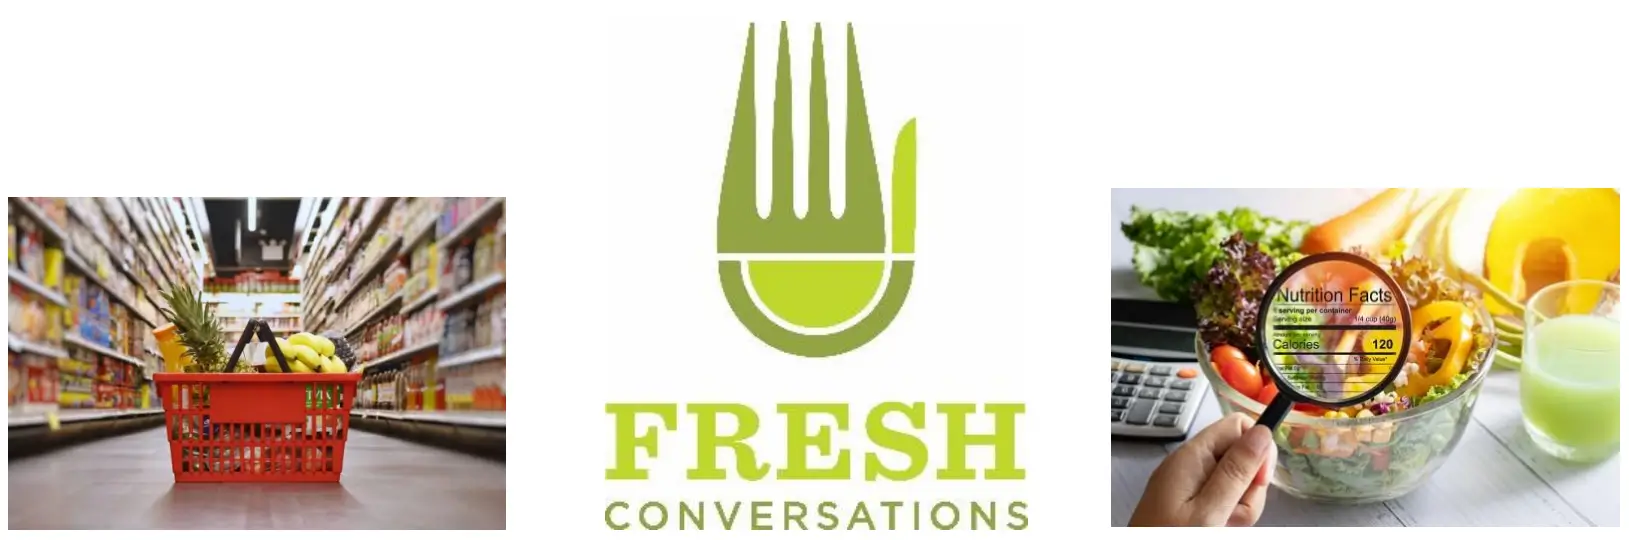 A green logo of fresh conversations with an image of a fork.